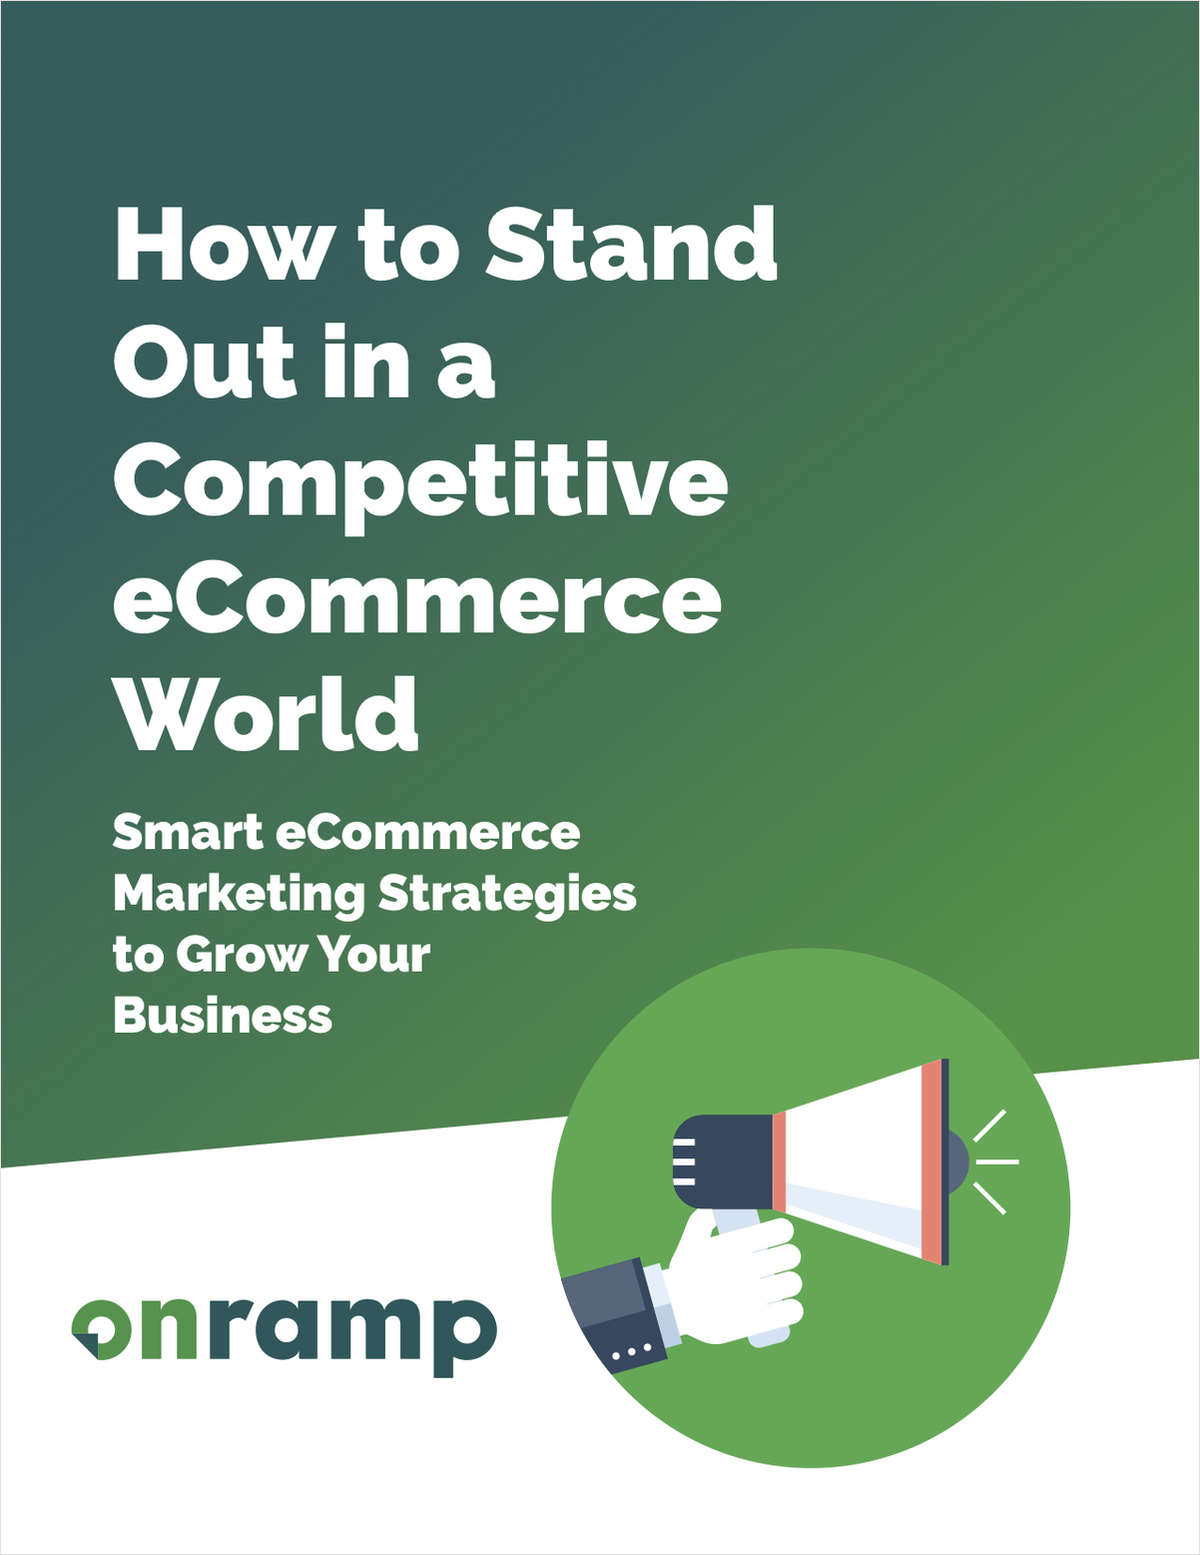 How to Stand Out in a Competitive eCommerce World